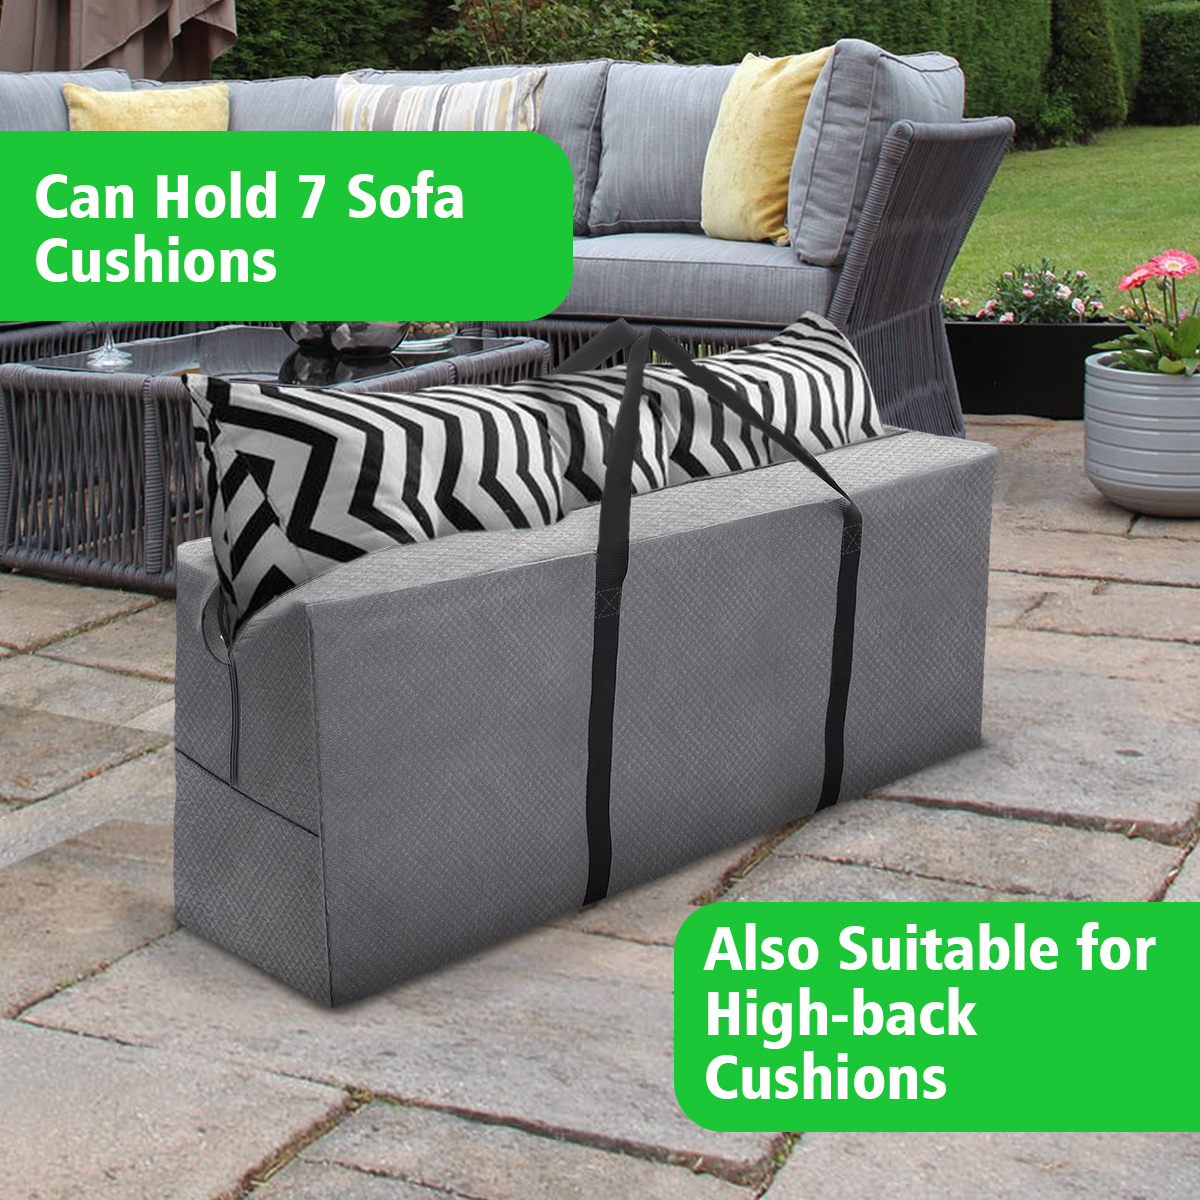 Tvird-Extra-Large-Storage-Bag-for-Cushion-Garden-Furniture-Foldable-Waterproof-Heavy-Duty-Outdoor--S-1950094-8